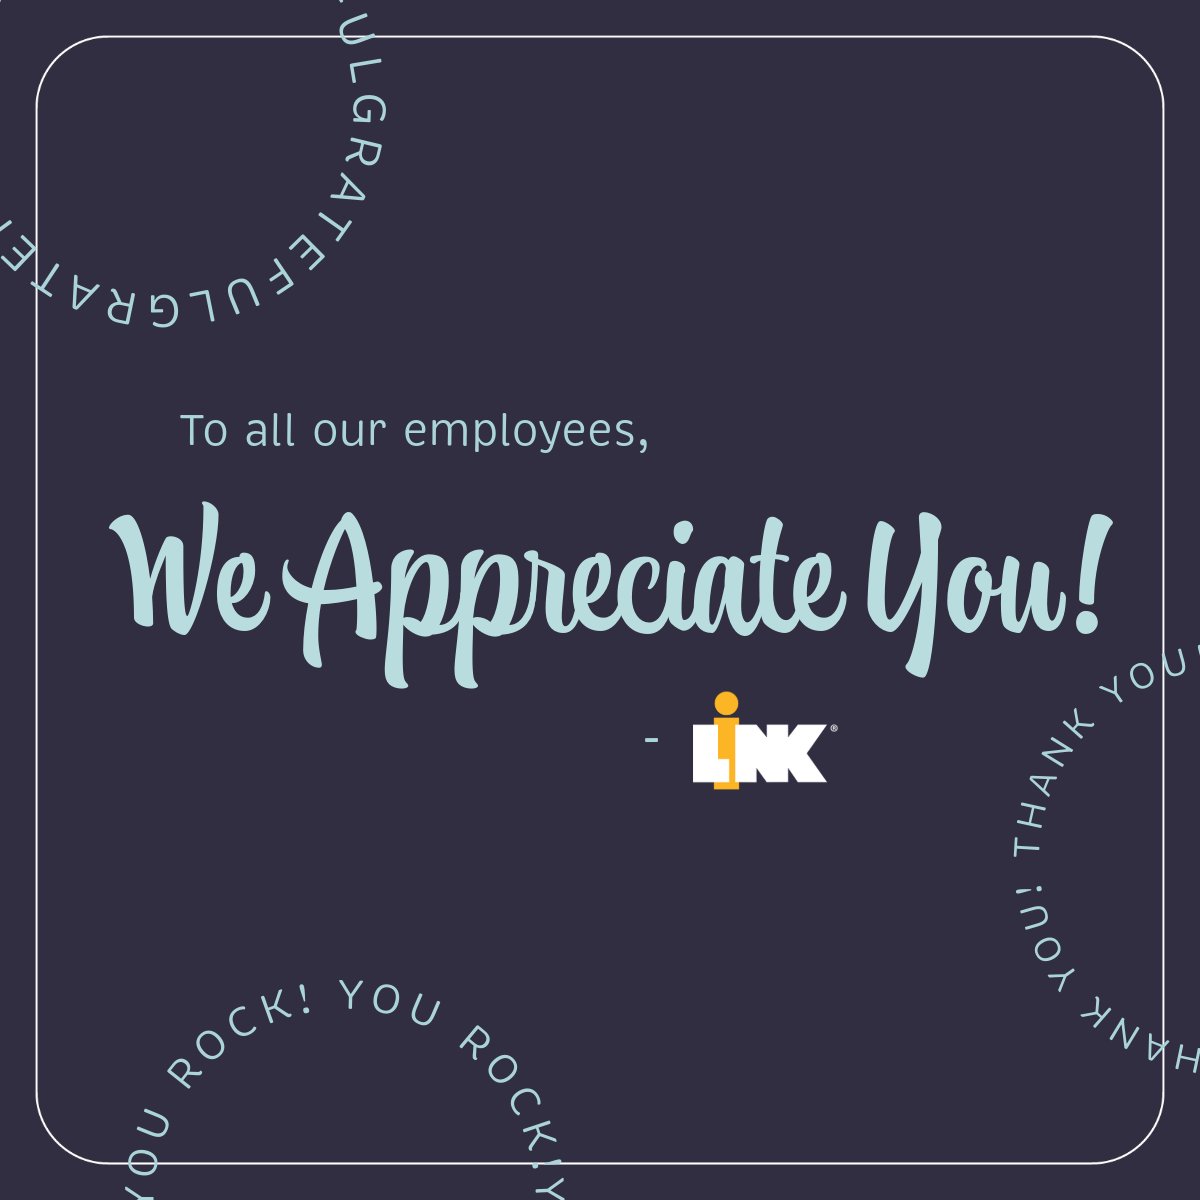 #EmployeeAppreciationDay! We express our gratitude to every member of our awesome team at Link and all of our employees throughout TX. Your dedication inspires us, and we are grateful to have such an exceptional team. #LinkValues #LinkJobs #StaffingSolutions #DirectHire #TempJobs